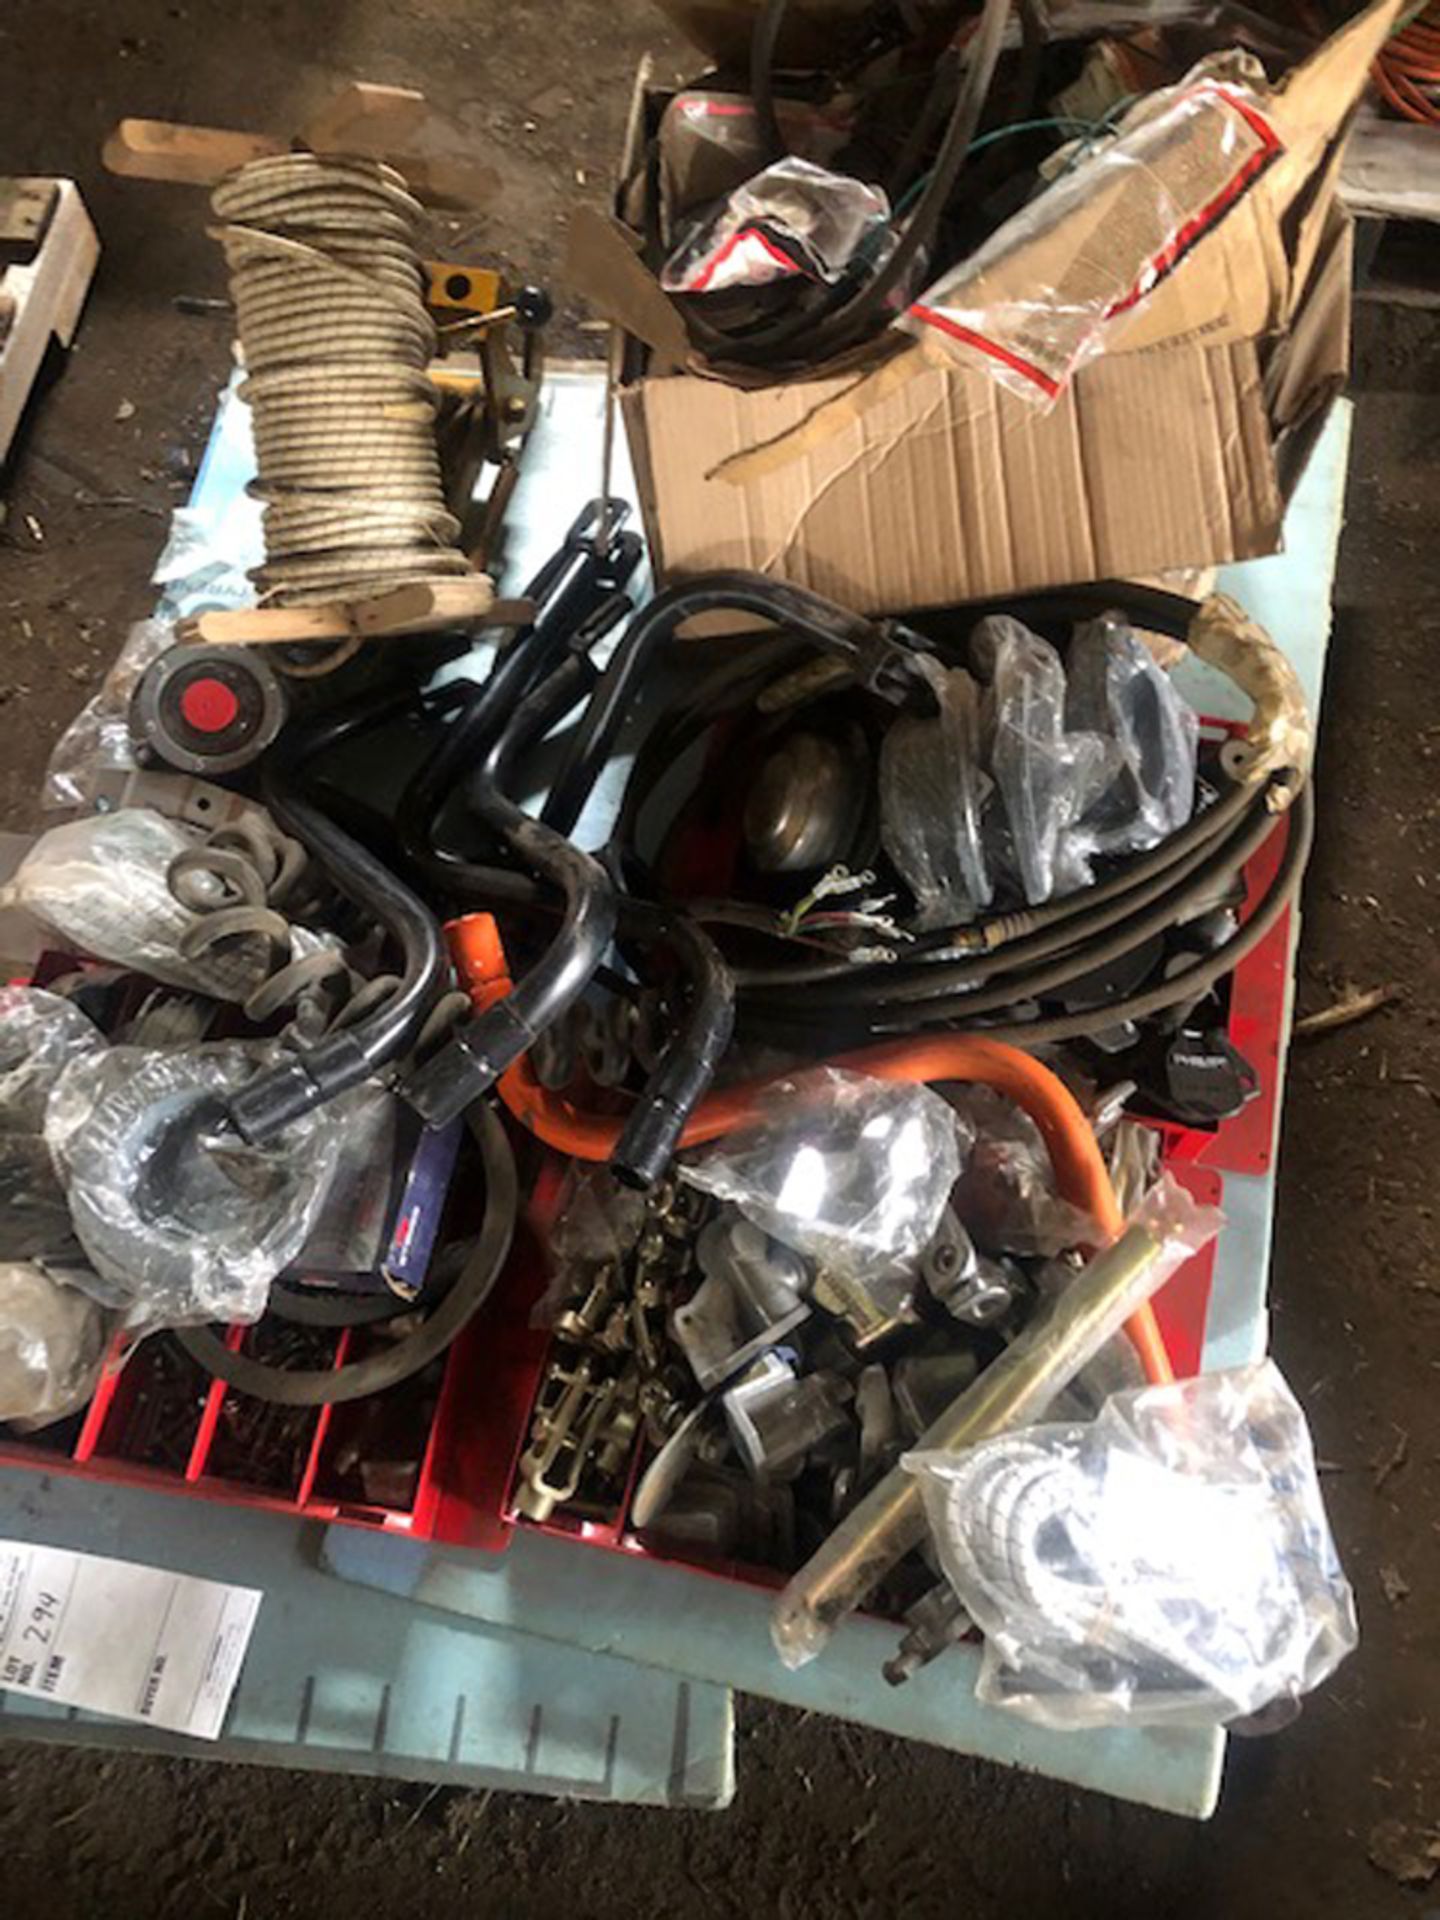 skid of misc. tools, trailer parts, and misc. truck parts